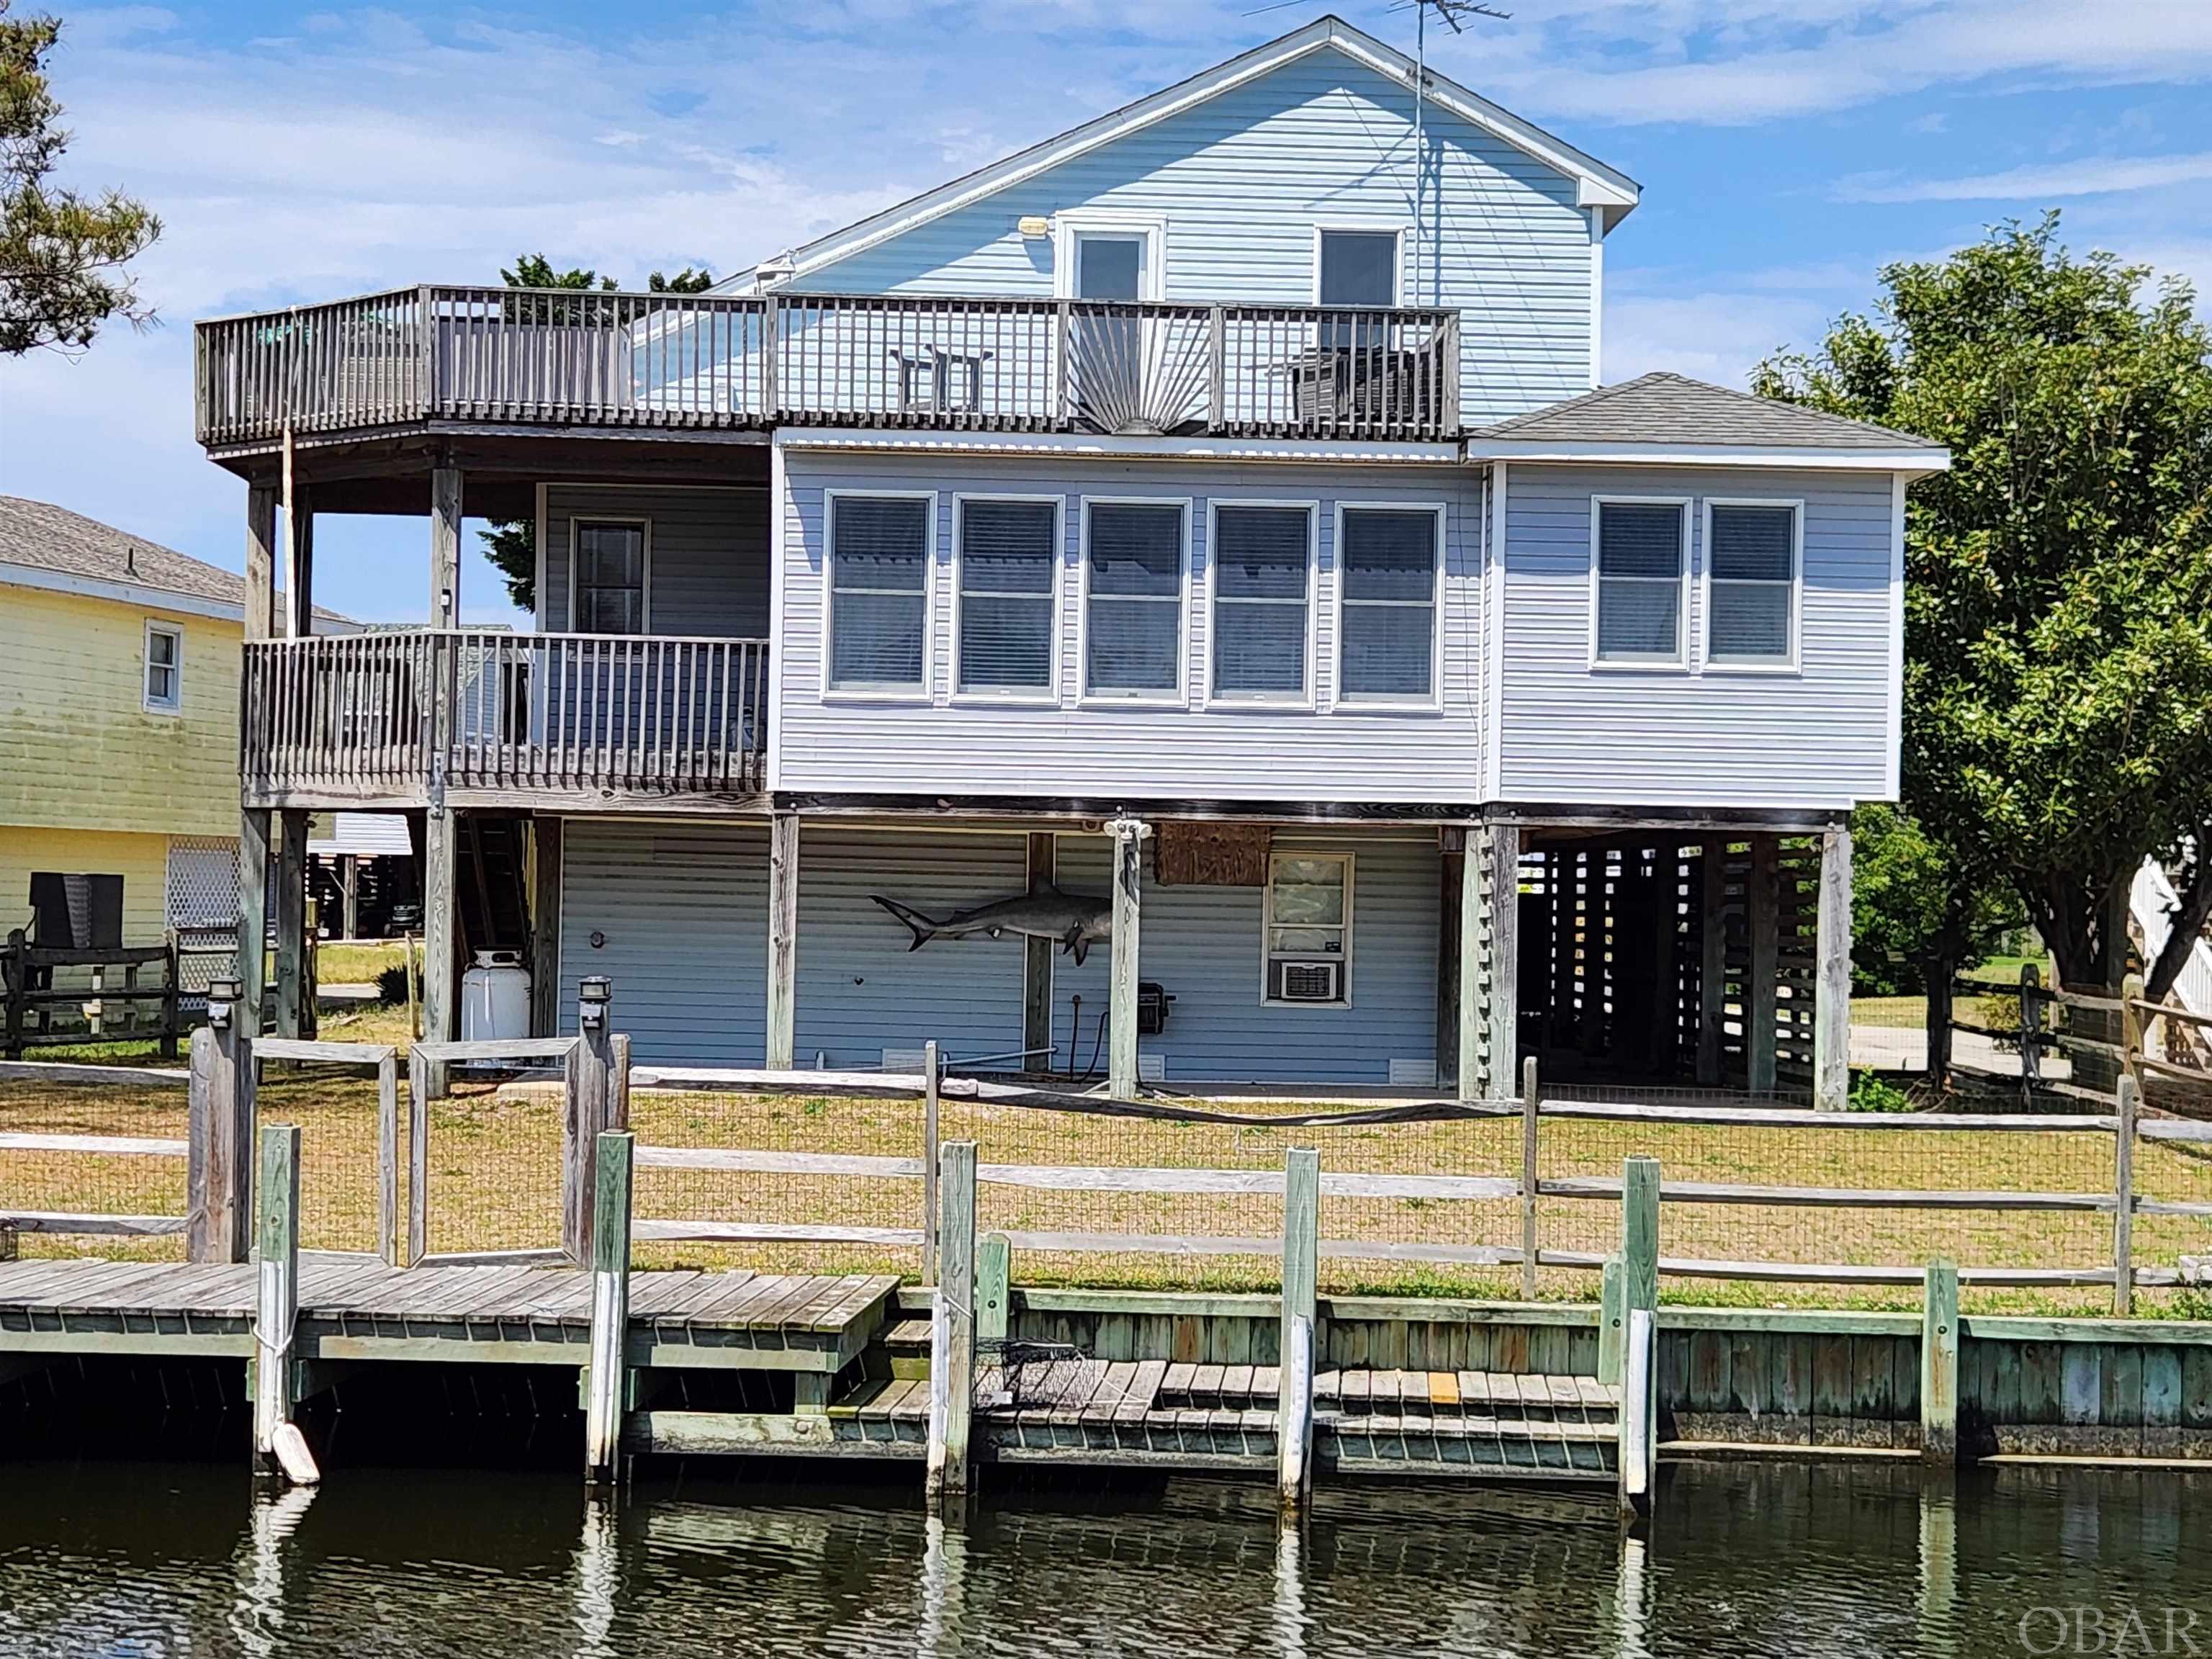 BOATERS!!! or ... WATER LOVERS! ... COLINGTON HARBOUR ... 75' ON DEEP WATER CANAL WITH DIRECT ACCESS TO THE SOUND! BULKHEAD IN PLACE WITH DOCK AND JET SKI / KAYAK LAUNCH! HOME FEATURES EXTENSIVE CANAL VIEWS AND SOUND VIEW *** ROOFTOP DECK WITH EXPANSIVE CANAL VIEWS AND SOUND VIEW FROM THE ONE YEAR NEW SALTWATER HOT TUB (from Great Atlantic Pools & Spas) *** Home Interior Features Spacious Great Room with High Volume Ceiling, Gas Fireplace (AmeriGas LP Tank and Fireplace never used by seller), Hardwood Floors in this space, Front Door w/ Foyer, Hallway Leads to Great Room to right, or En Suite Bedroom on left w/ Spacious Walk-in Closet and Bath - Bath Features Soaking Tub and Separate Shower ** Back to Hallway - Laundry on left, the Hall Full Bath on Left, and then at End of Hallway Spacious Kitchen w/ Breakfast Counter (see photos!), Pantry, Separate but Connected Florida Room w/ Windows Galore with Canal Views! - Sellers presently utilize as Dining Space but could be utilized many ways ... Sliding Glass Door to Mid-Level Covered Deck *** in Great Room - Stair along West Wall leads to Loft Hallway with Full Bath and 2 additional Bedrooms ... Door at east end of the Hallway leads to Roof Level Top Fiberglass Deck with Hot Tub - Private and Fabulous Views of the Canal! *** Ground Level is deceiving - there is a large One Car Garage, but the entire area is enclosed under home (840 SQUARE FEET!) as the Garage only takes up half of the space - so Tons of Space for Workshop / Storage *** Rear Yard is Fenced and includes Split Rail Fence design along Water's edge to minimize disruption of water views but includes wire mesh to keep the little ones safely in the yard! Yard has irrigation system - pump in garage- sellers stopped using it after 1 year as every time their yard person came to cut the grass one of the zones was on - so they shut it off completely - so that is thought to still be working but offered as-is *** Colington Harbour Features a Gated Entrance to the Community, Clubhouse facility, Community Pool, Tennis Court, Boat Ramp, and Slips ... and Soundfront Sandy Beach with playpark for kids by the Pool (Note: Community Pool, Boat Slips, etc. may require additional fee) *** All in All a Fabulous Home for anyone wanting a Water View, a place to park your boat, Jet Ski, Kayak, etc. *** EASY & QUICK access to the Sound ... Fishing, Pleasure Rides, or catch a Sunset out on your Boat! ... YOU MUST take in the Magical Carolina Sunsets which are Fabulous in Summer and Absolutely Stunning in Winter! * New Hot Tub Tarp in upstairs Closet with Umbrella for Table on Deck *** See Associated Docs for a List of Numerous Owner Improvements *** Home Offered Fully Furnished with some exceptions Listed as Exclusions with Personal Property Bill of Sale *** Home Will make a Great Primary Residence, Second Home, or a Weekly Vacation Rental so you can enjoy some Personal Use but also some Income to offset some Ownership Expense! ... See Village Realty 2024 Rental Projection $34,241 *** DONT MISS OUT! ... Come See!